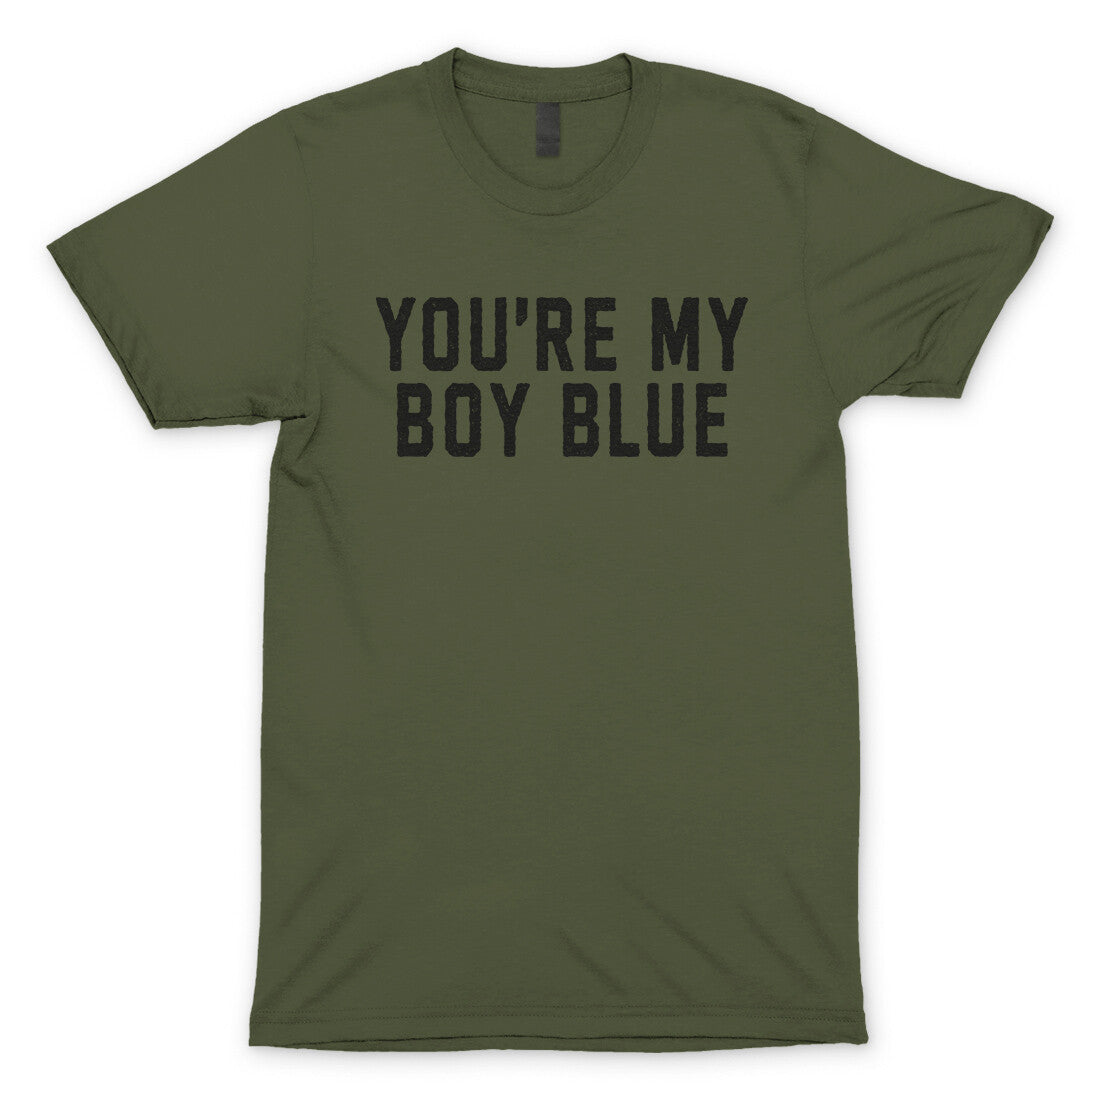 You're my Boy Blue in Military Green Color